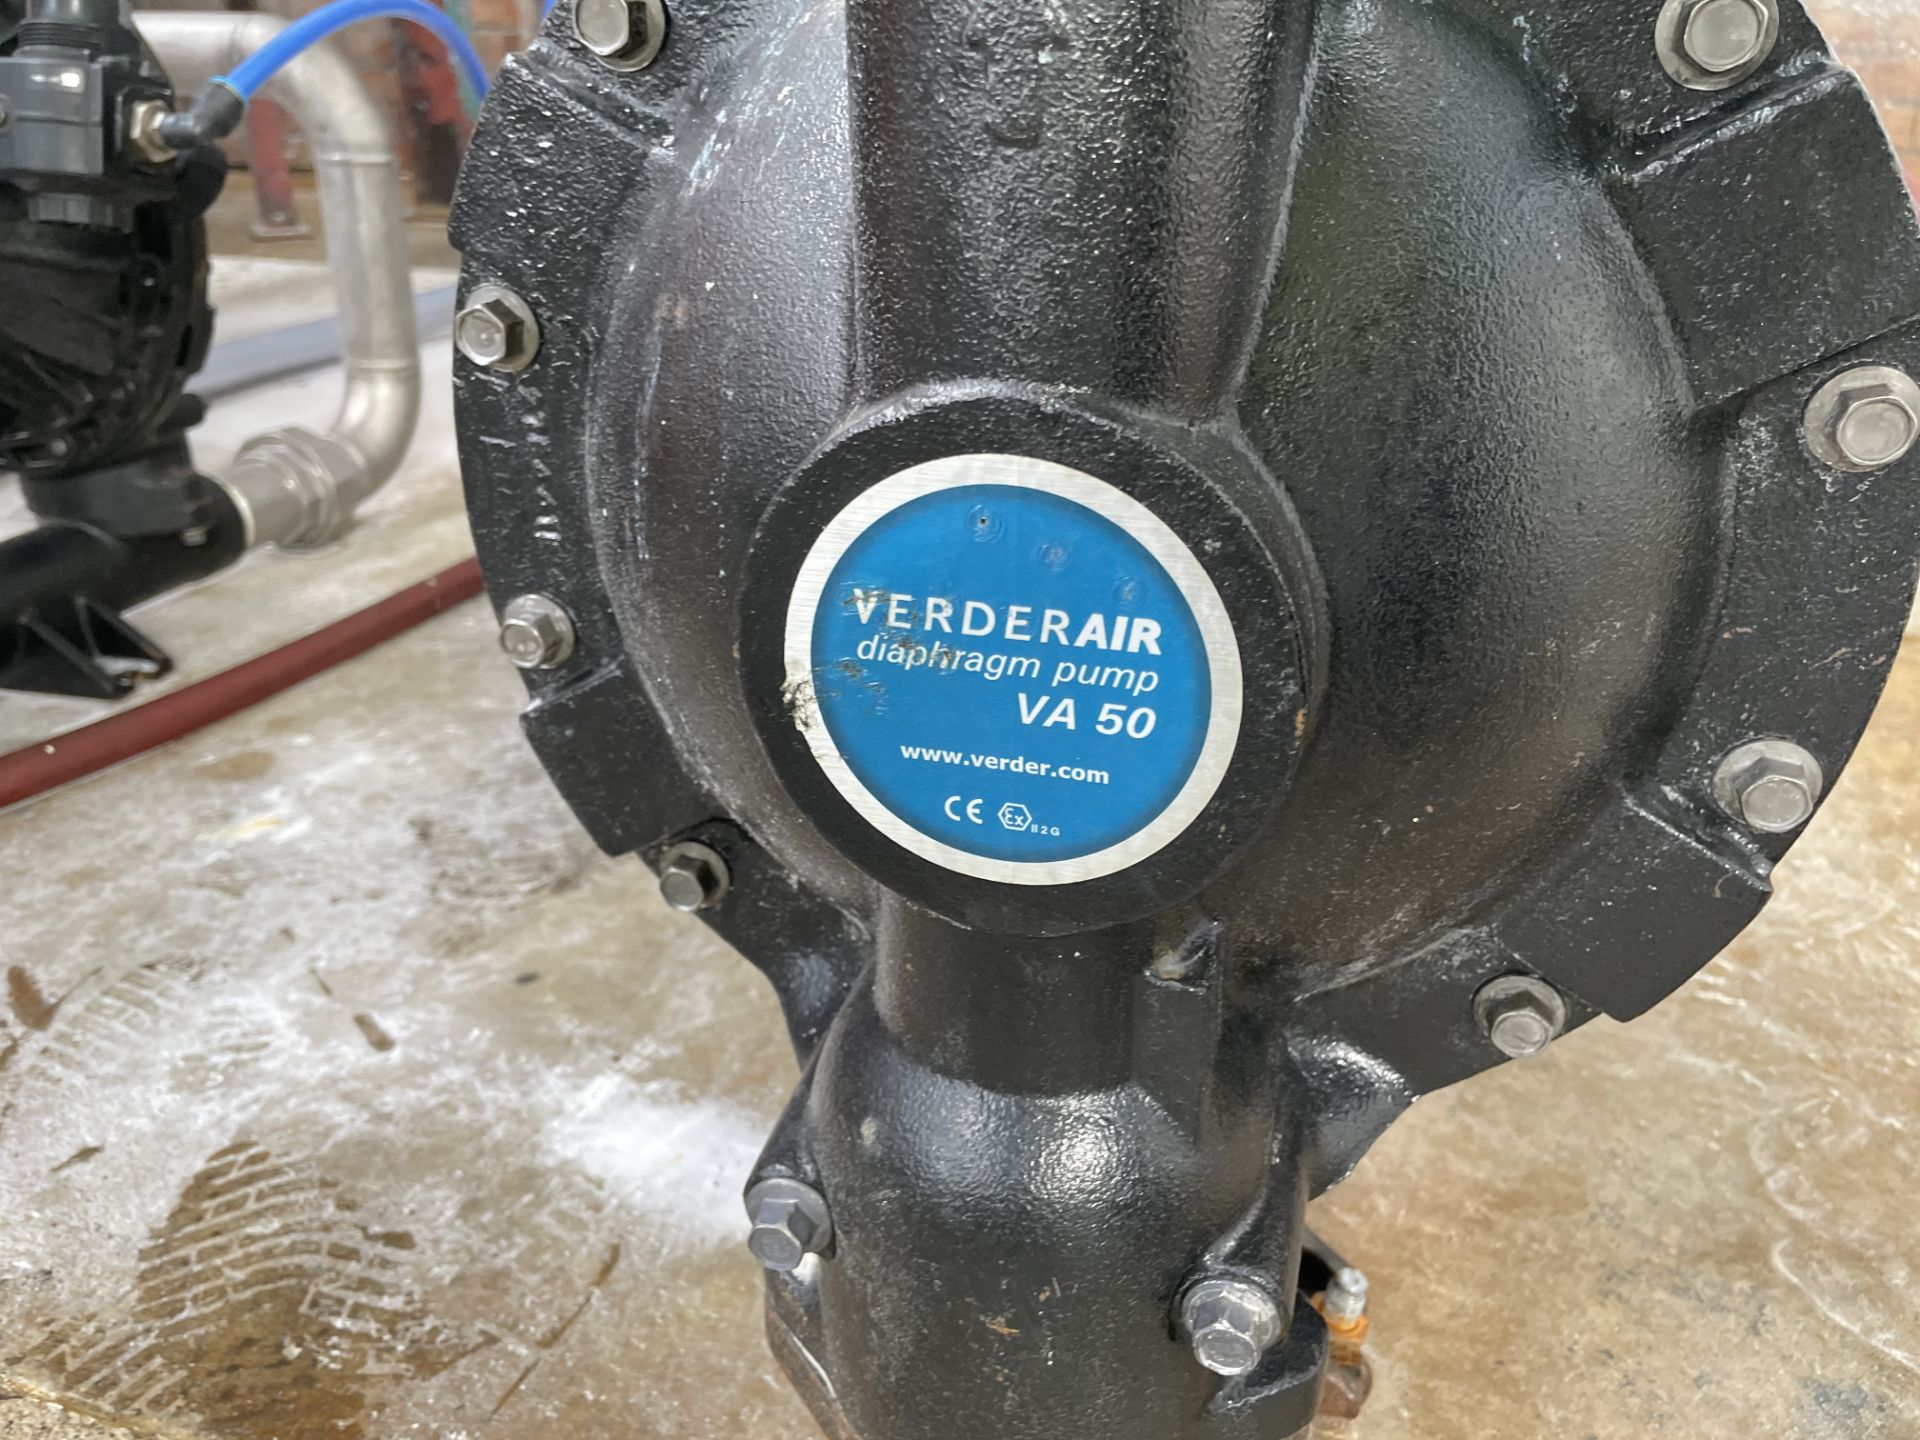 Verderair VA50 Diaphragm Pump (Contractors take out charge - £20) Please read the following - Image 2 of 2